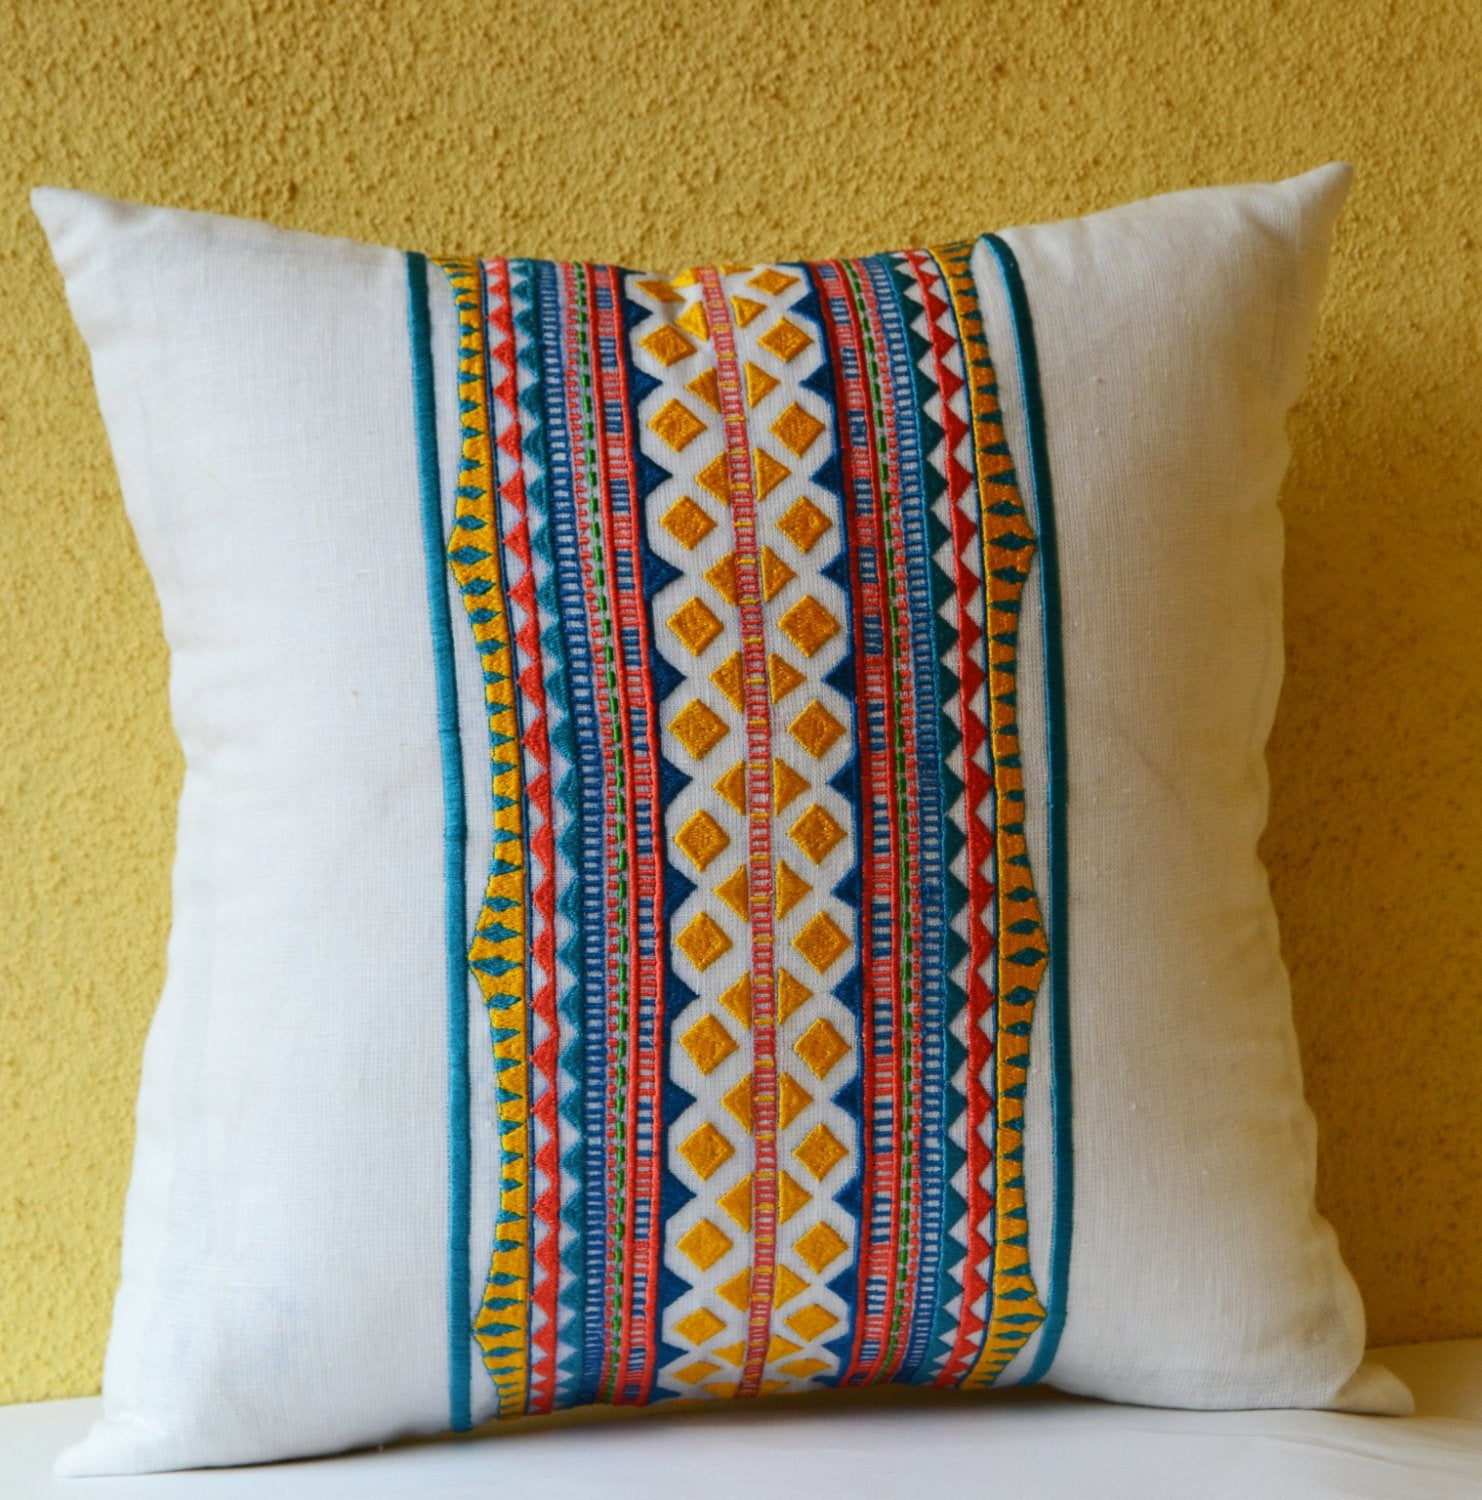 Boho Throw Pillow Covers 20x20 Blue And White Decorative Pillow